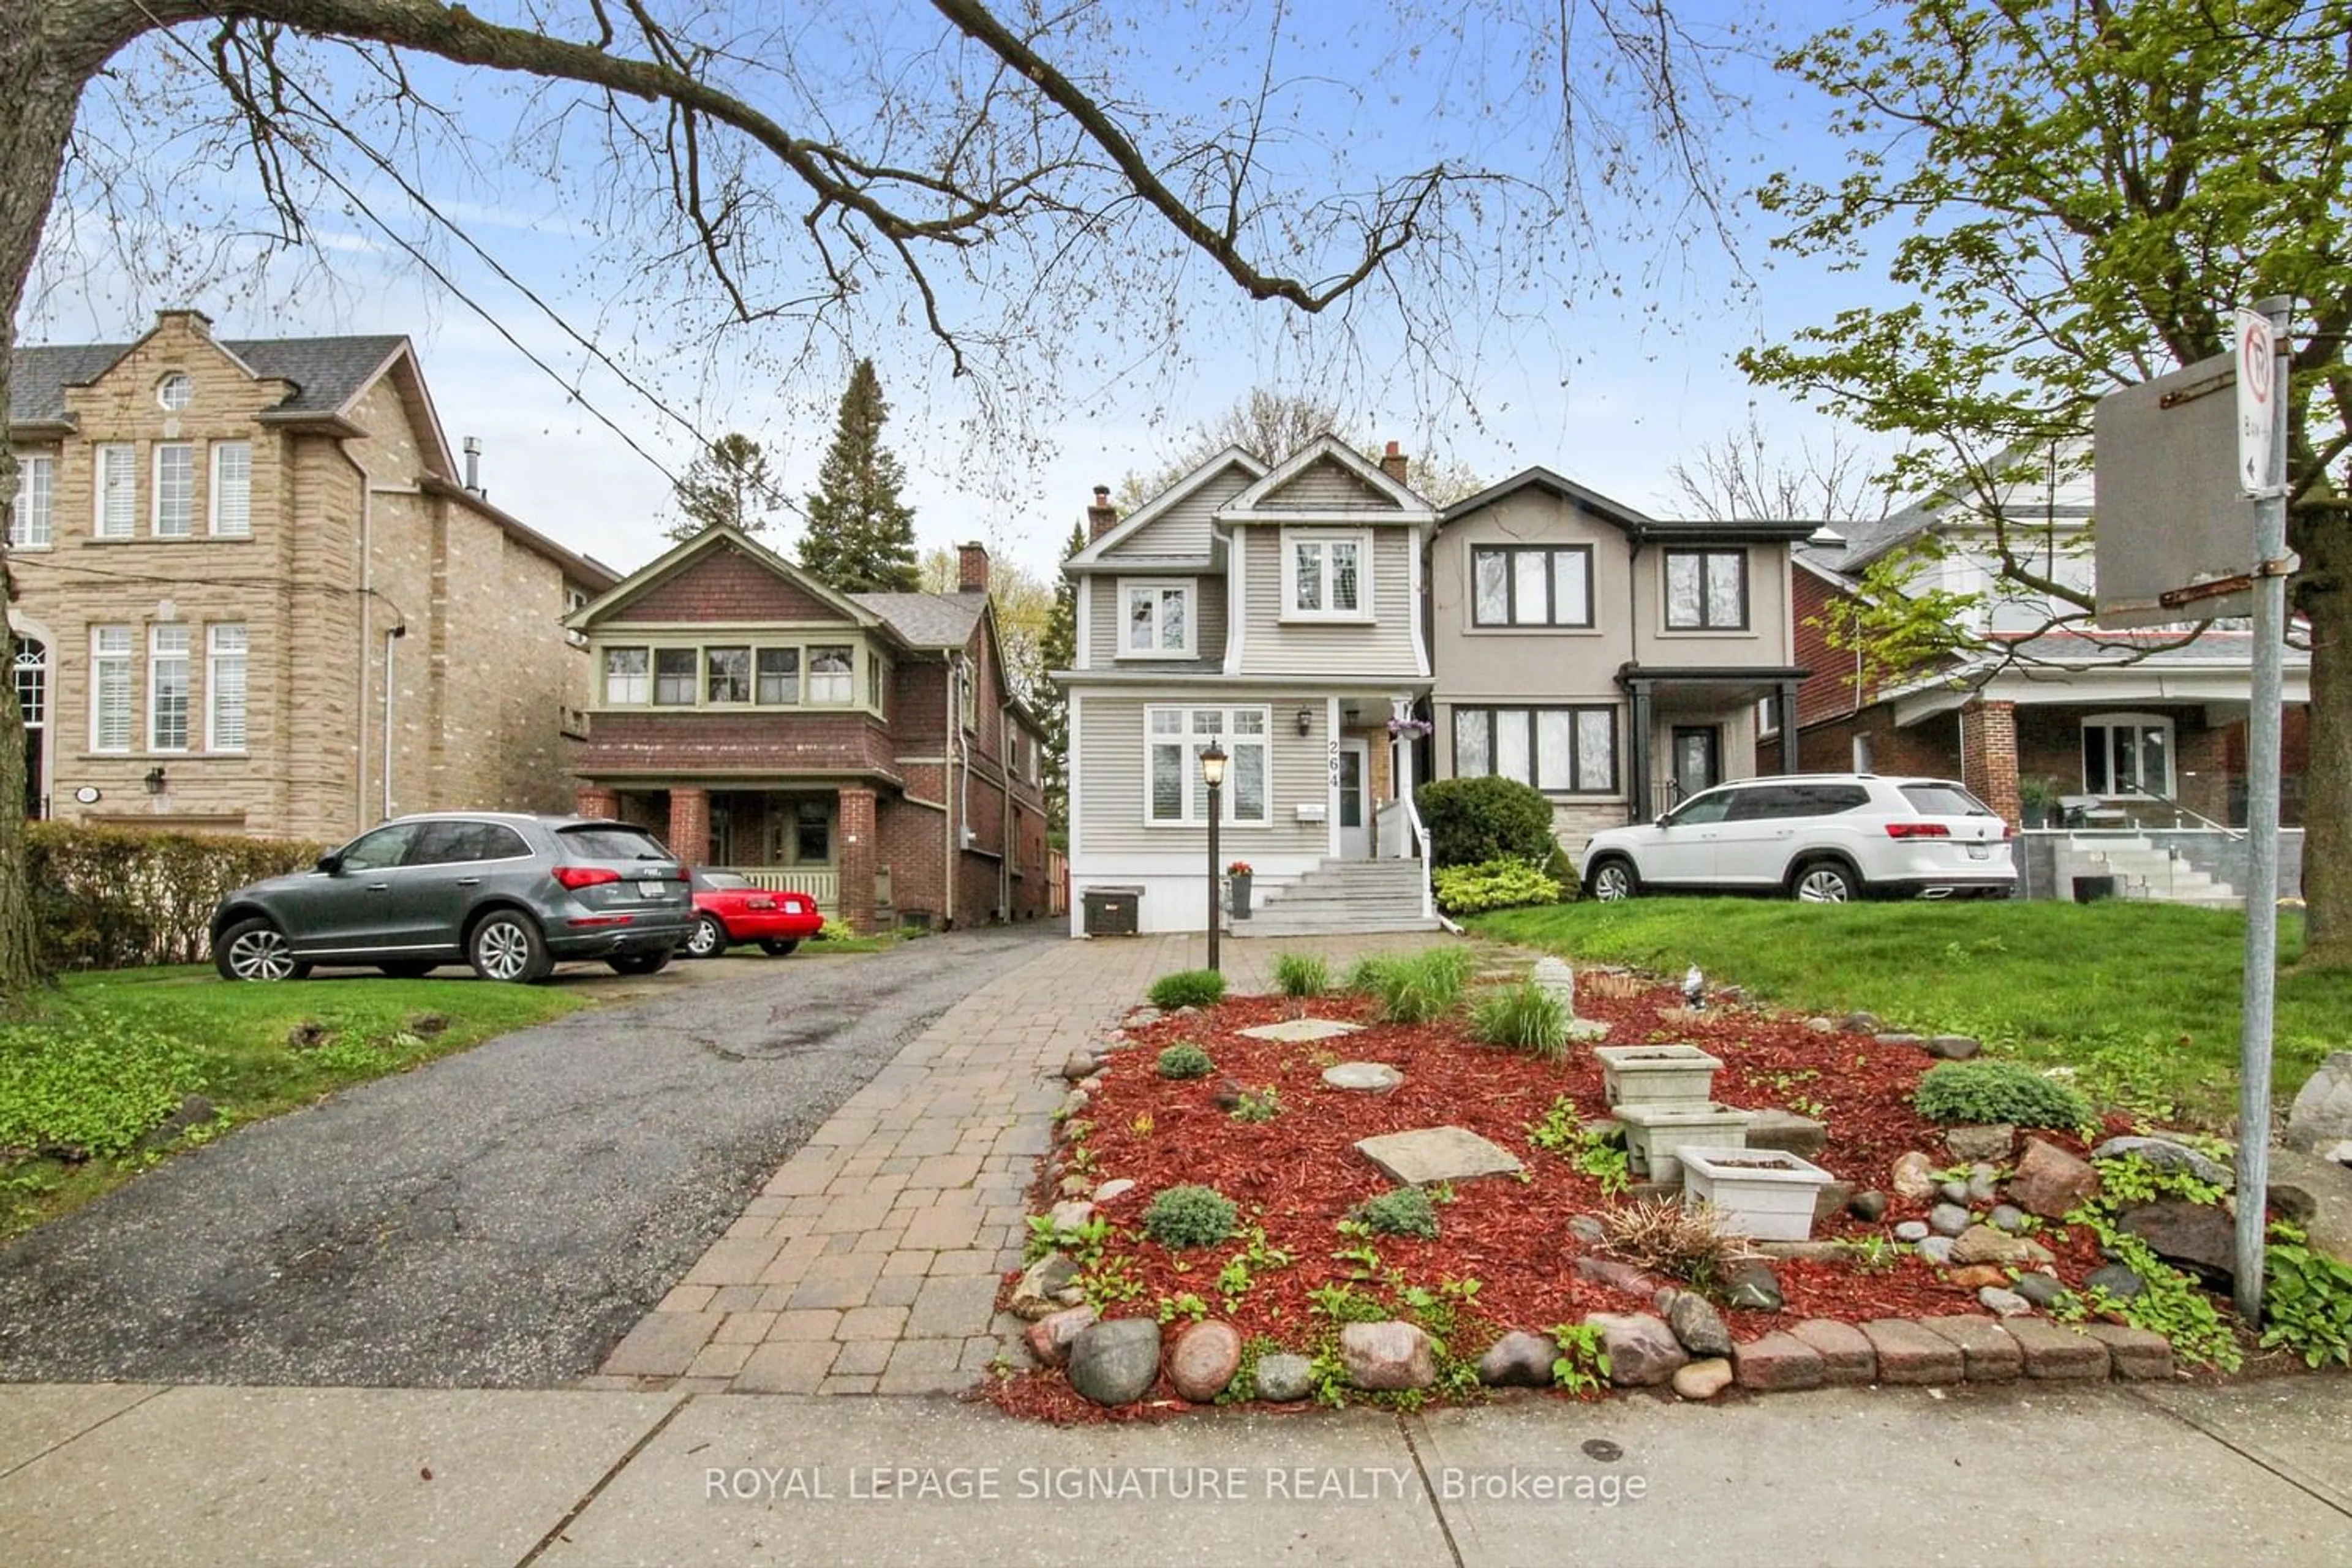 A pic from exterior of the house or condo for 264 Erskine Ave, Toronto Ontario M4P 1Z4